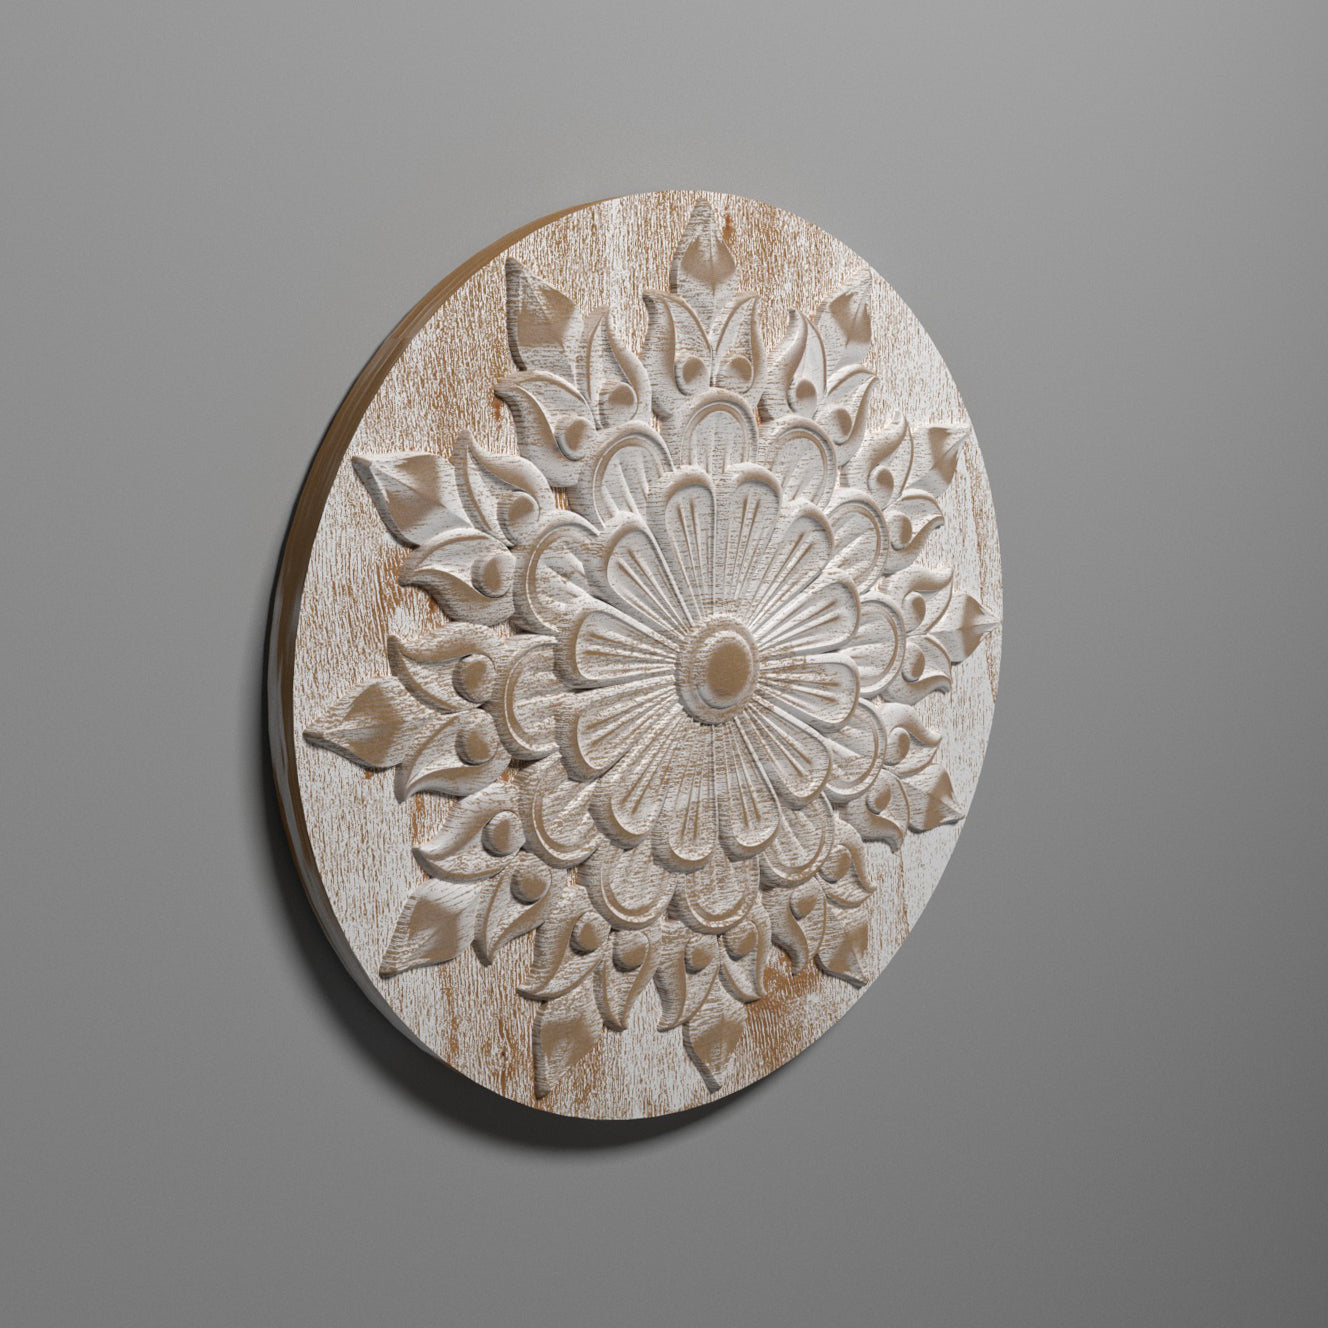 Captivating Carved Flower White Distressed Wall Art for a Rustic Elegance Wall Decor